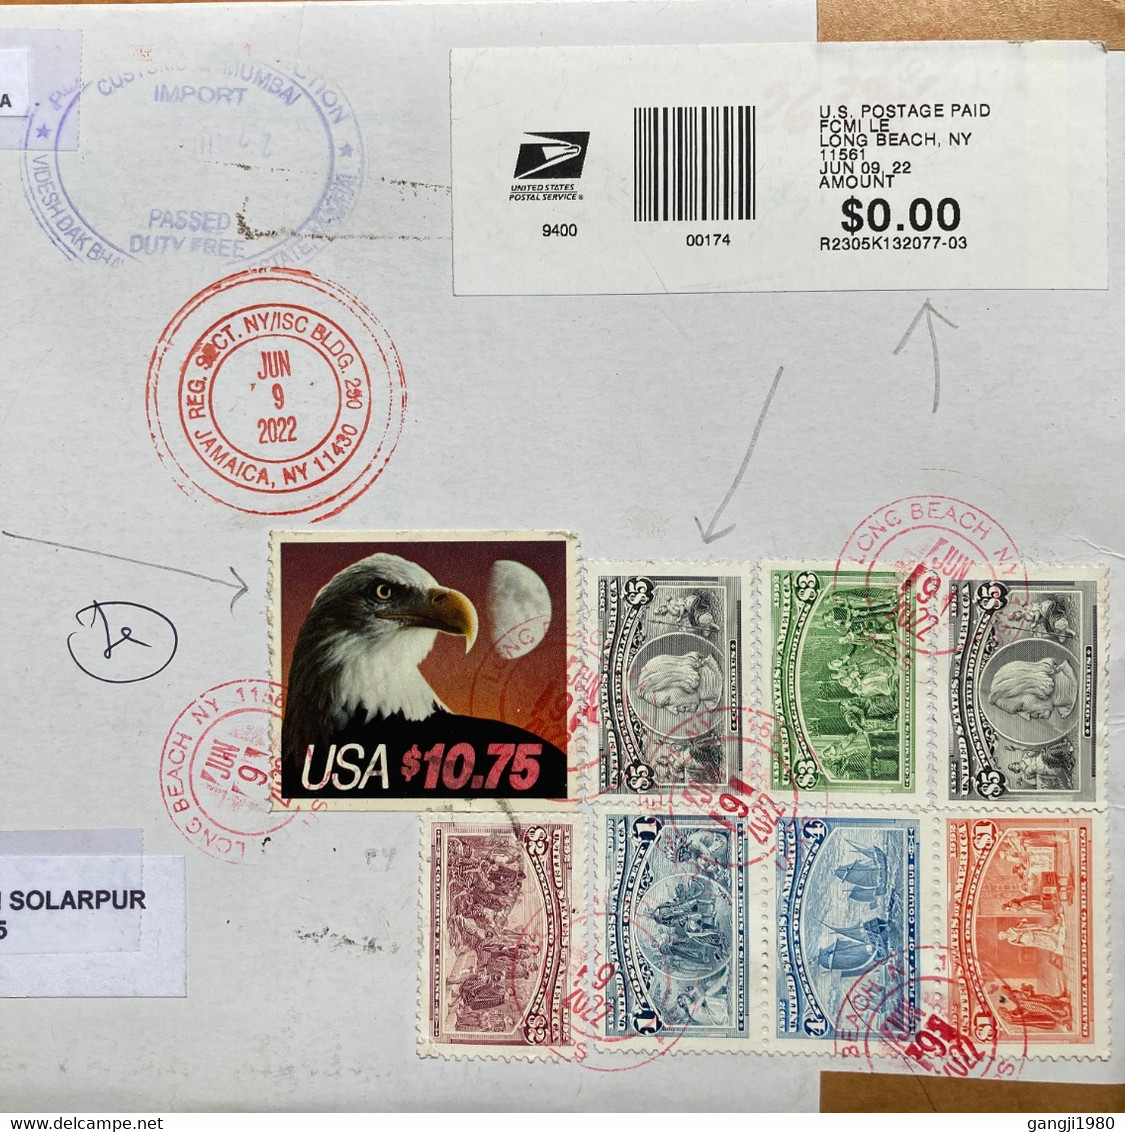 USA 2022, HIGH VALUE,1 TO 10 $ BIRD EAGLE ,COLUMBUS,26 $ F.VALUE STAMPS USED, REGISTER COVER TO INDIA, CUSTOM  HANDSTA - Covers & Documents